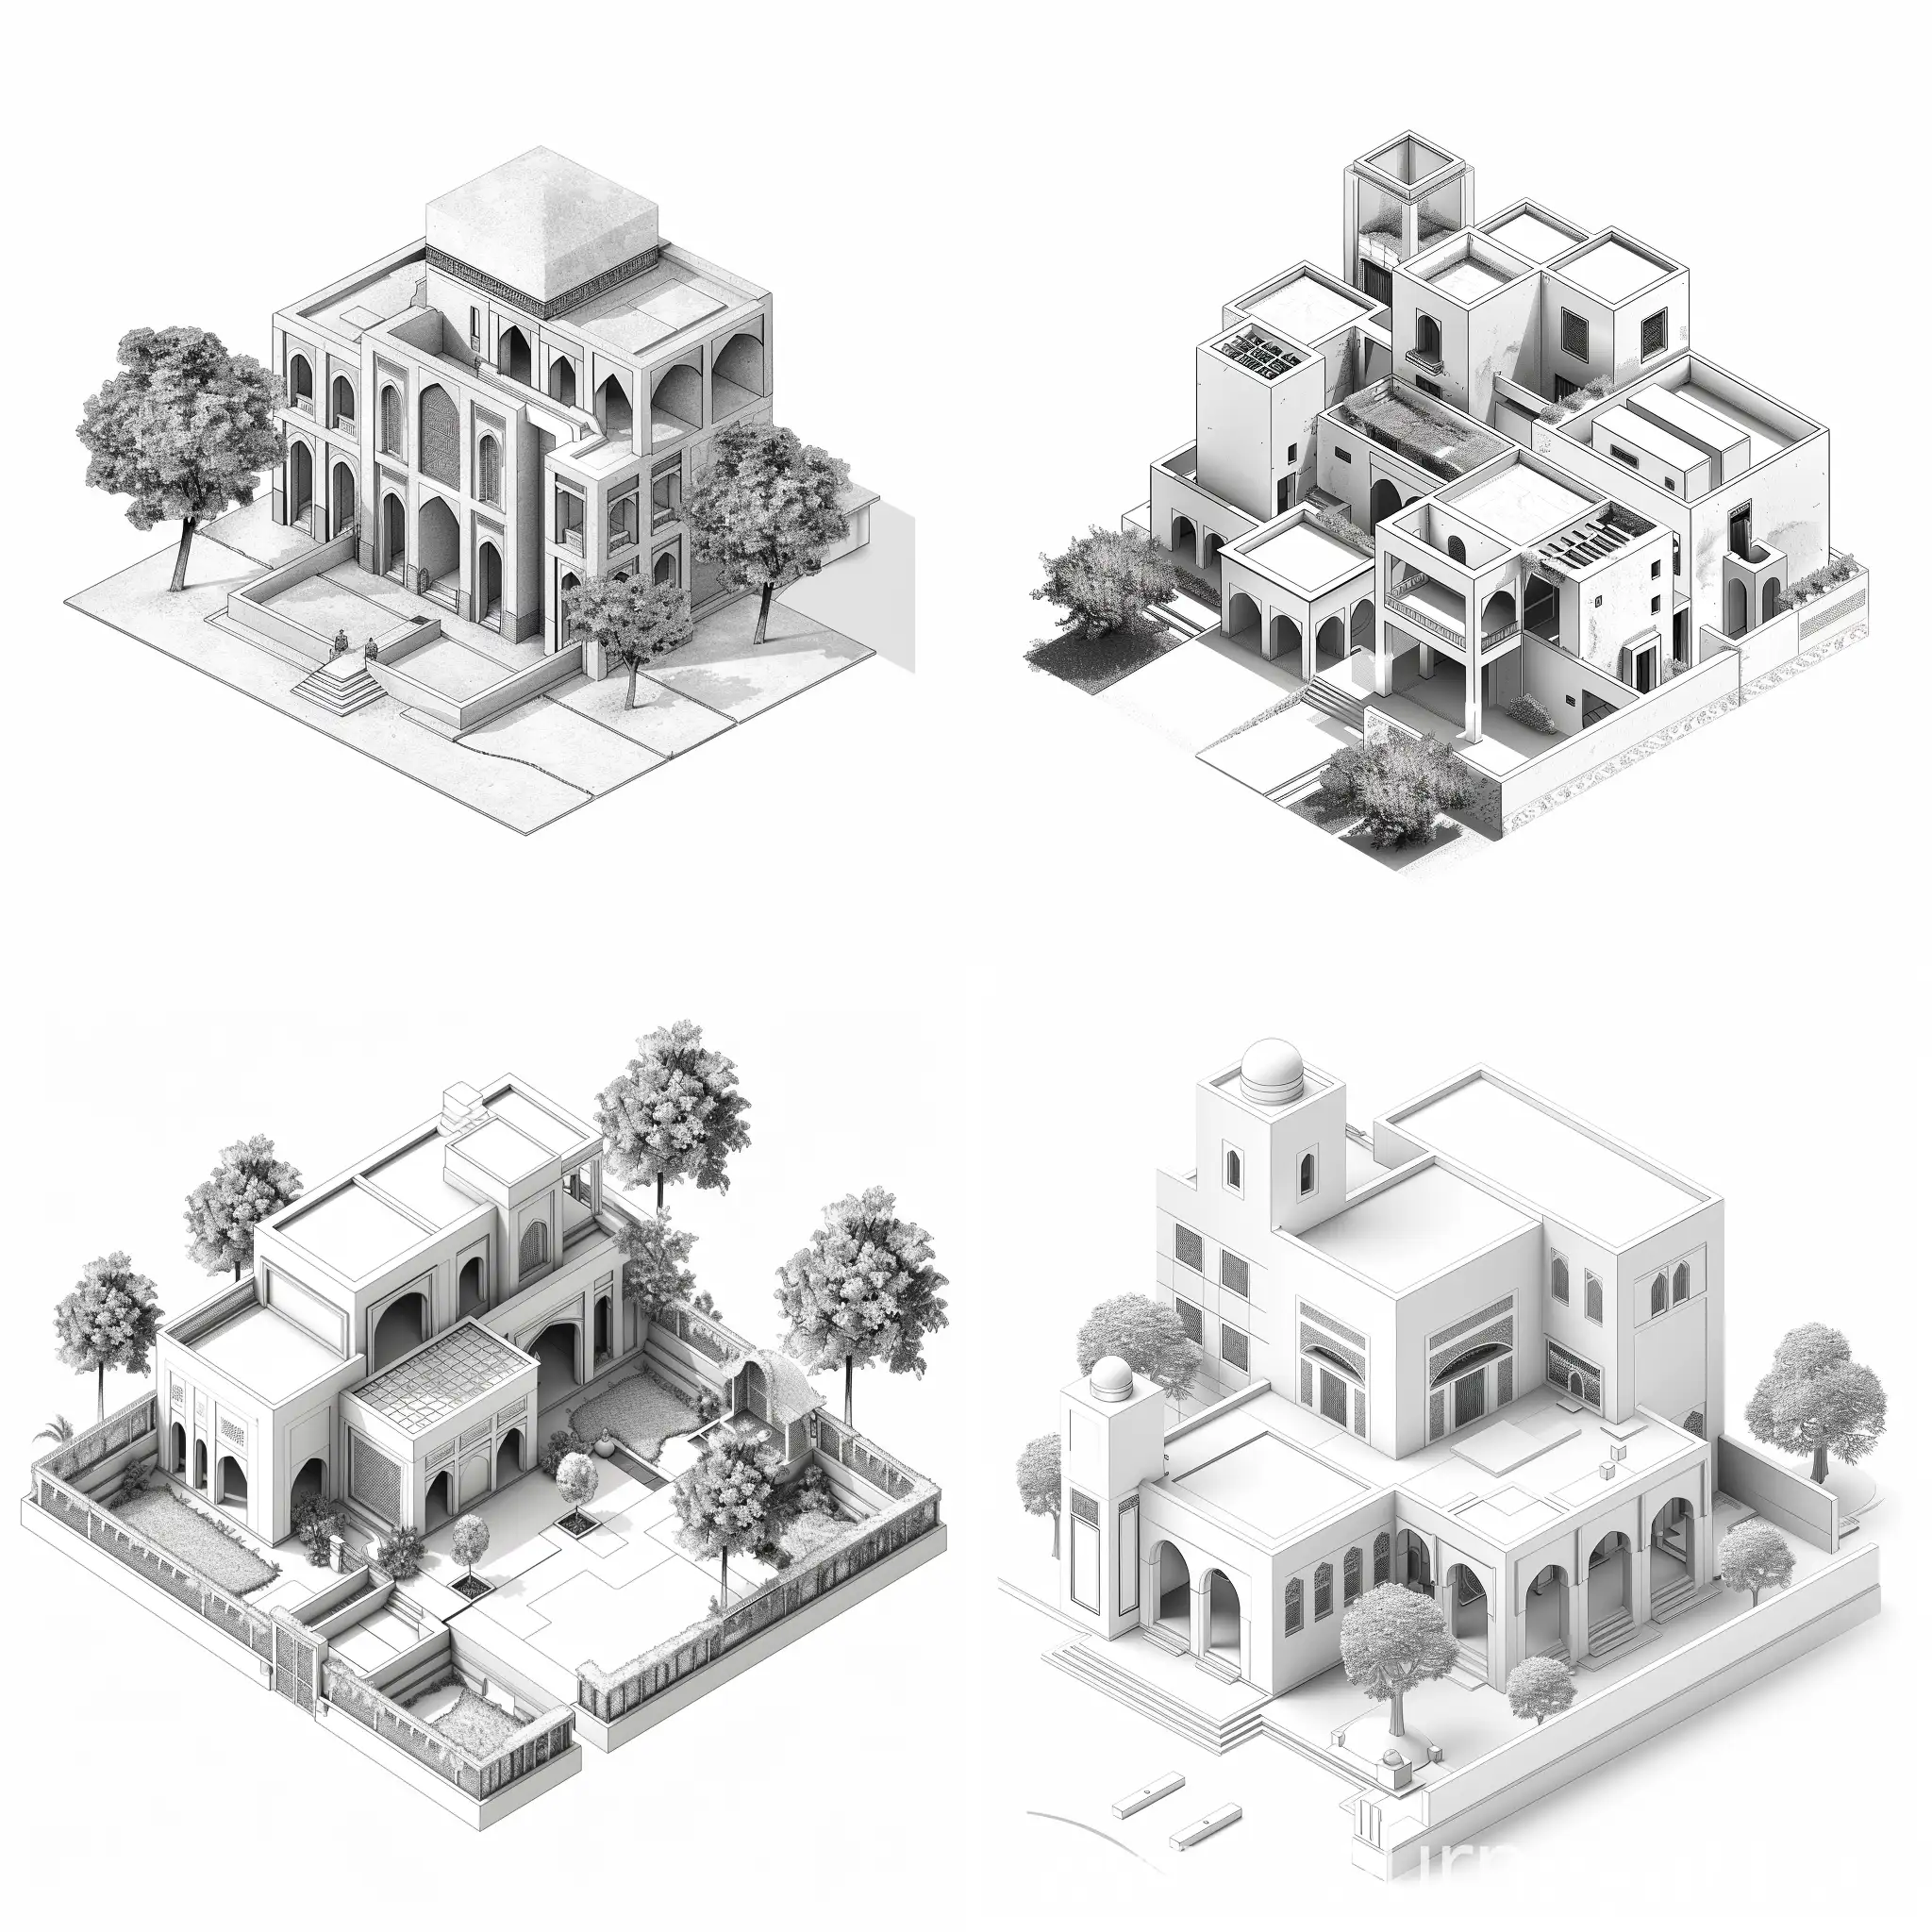 Meeting the future of residential architecture with regard to historical architecture ، Persian architecture ، 2d illustration ، isometric ، poster design ، monochrome ، graphic rendering T white background